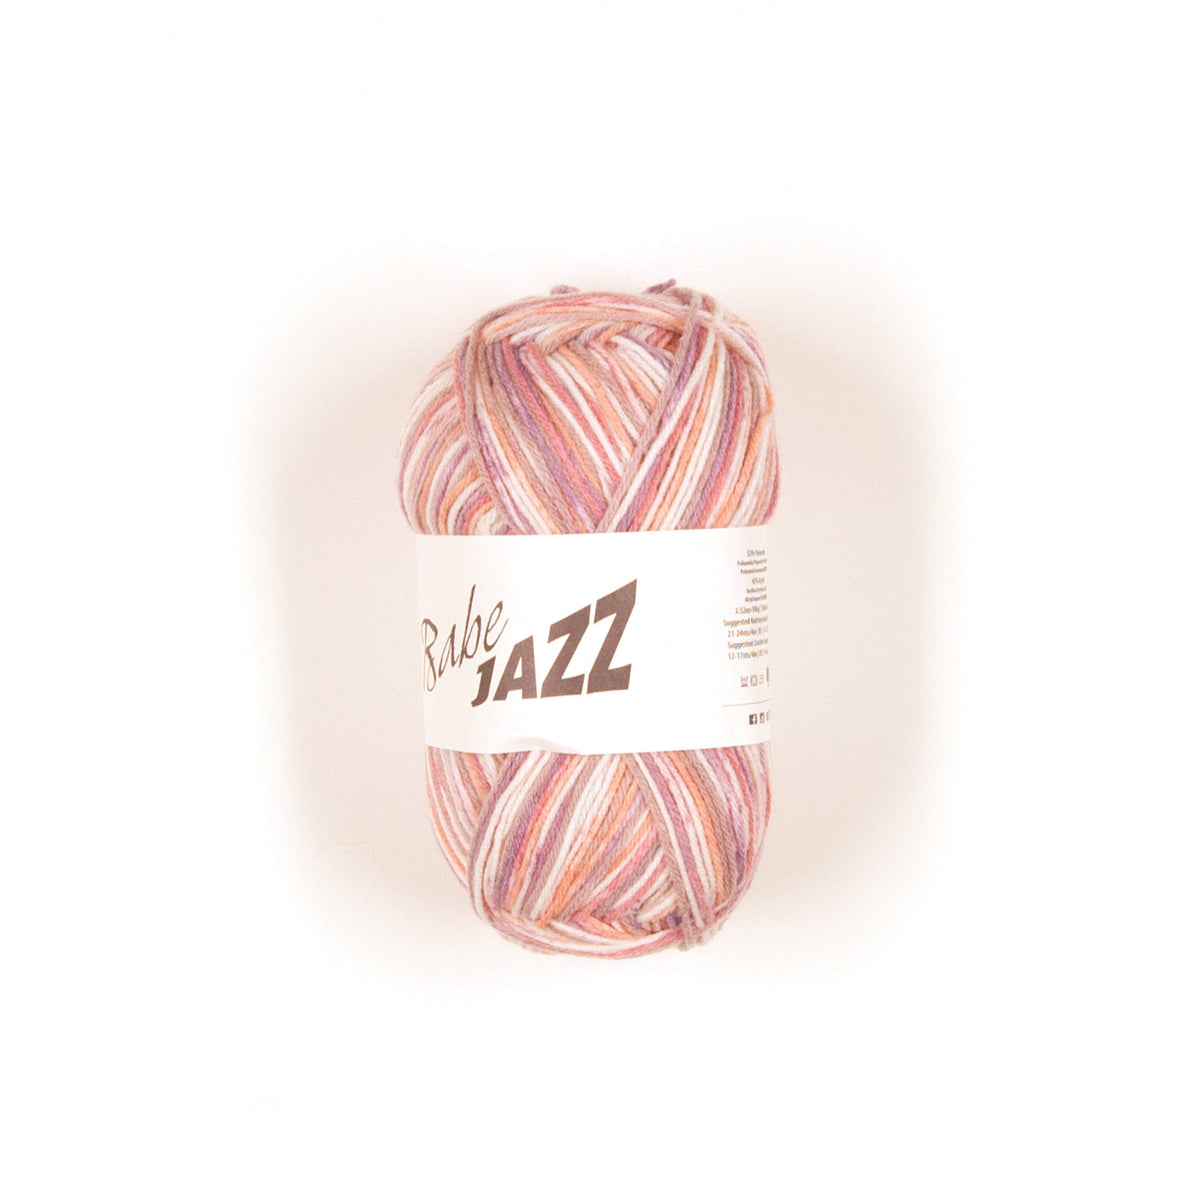 Jazz Up Your Supply With Affordable Wholesale trapillo yarn